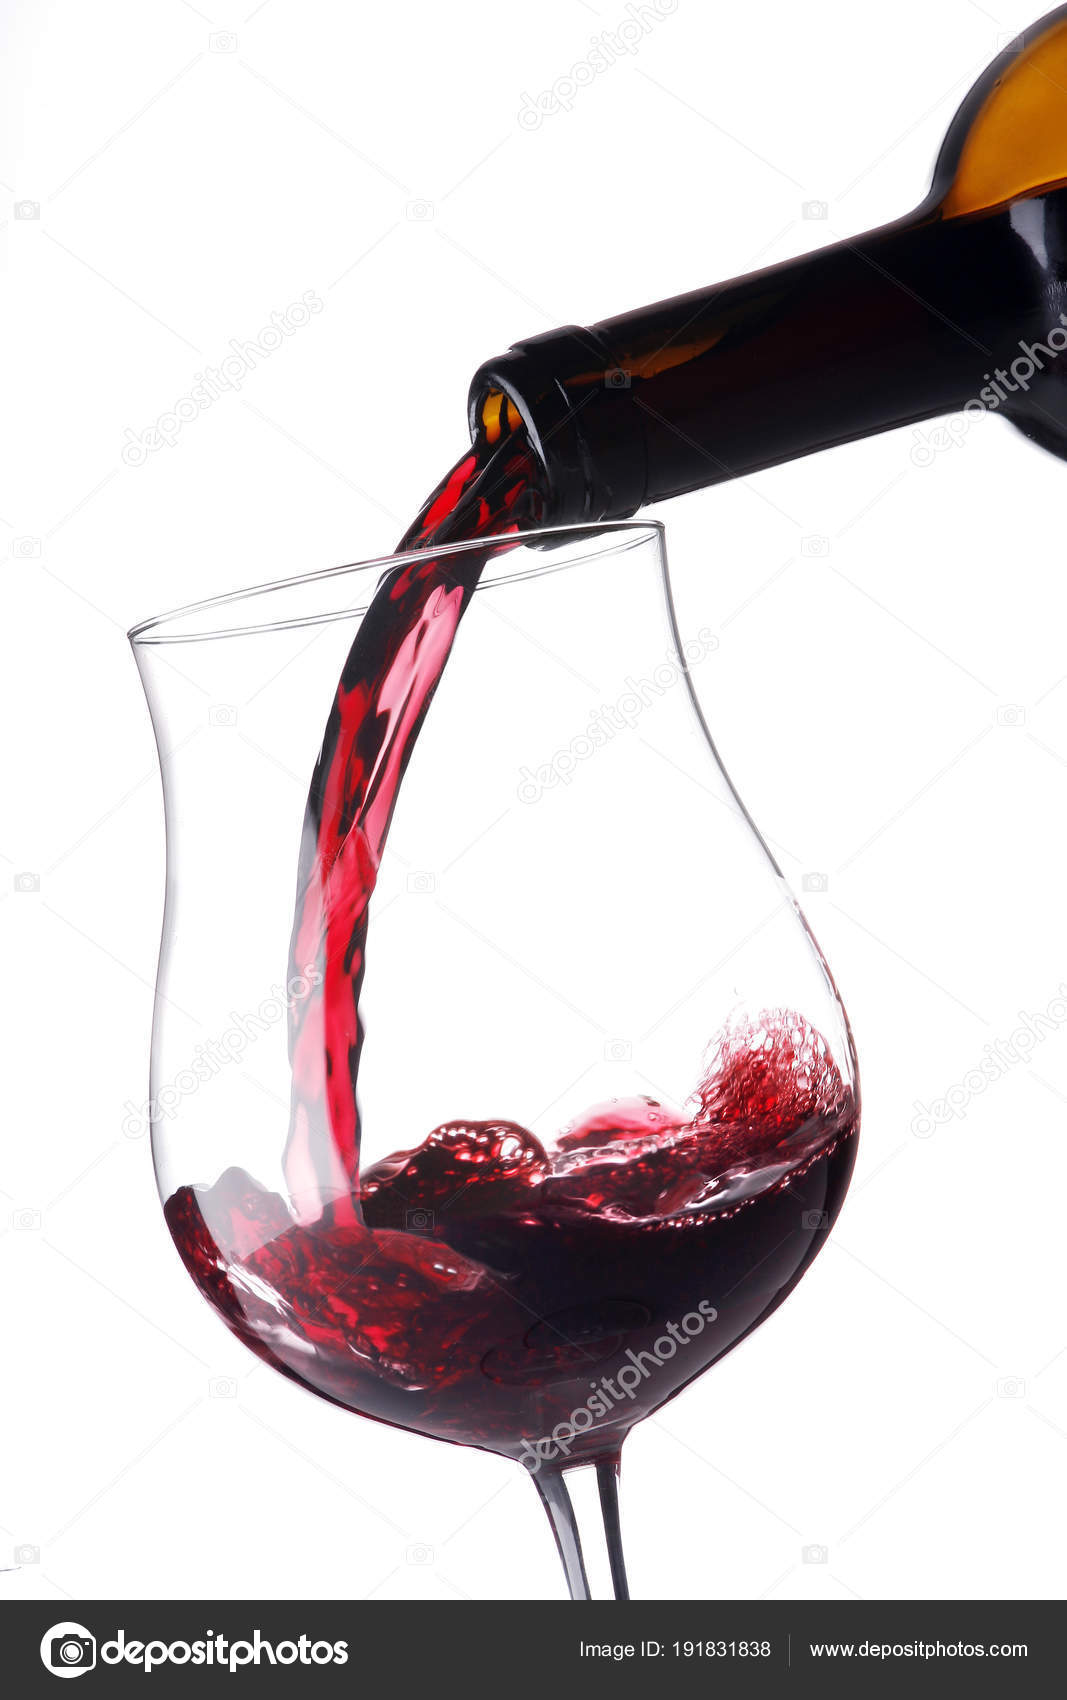 Red Wine Transparent Glass Goblet Stock Photo by ©fotostudiogb.libero.it 191831838